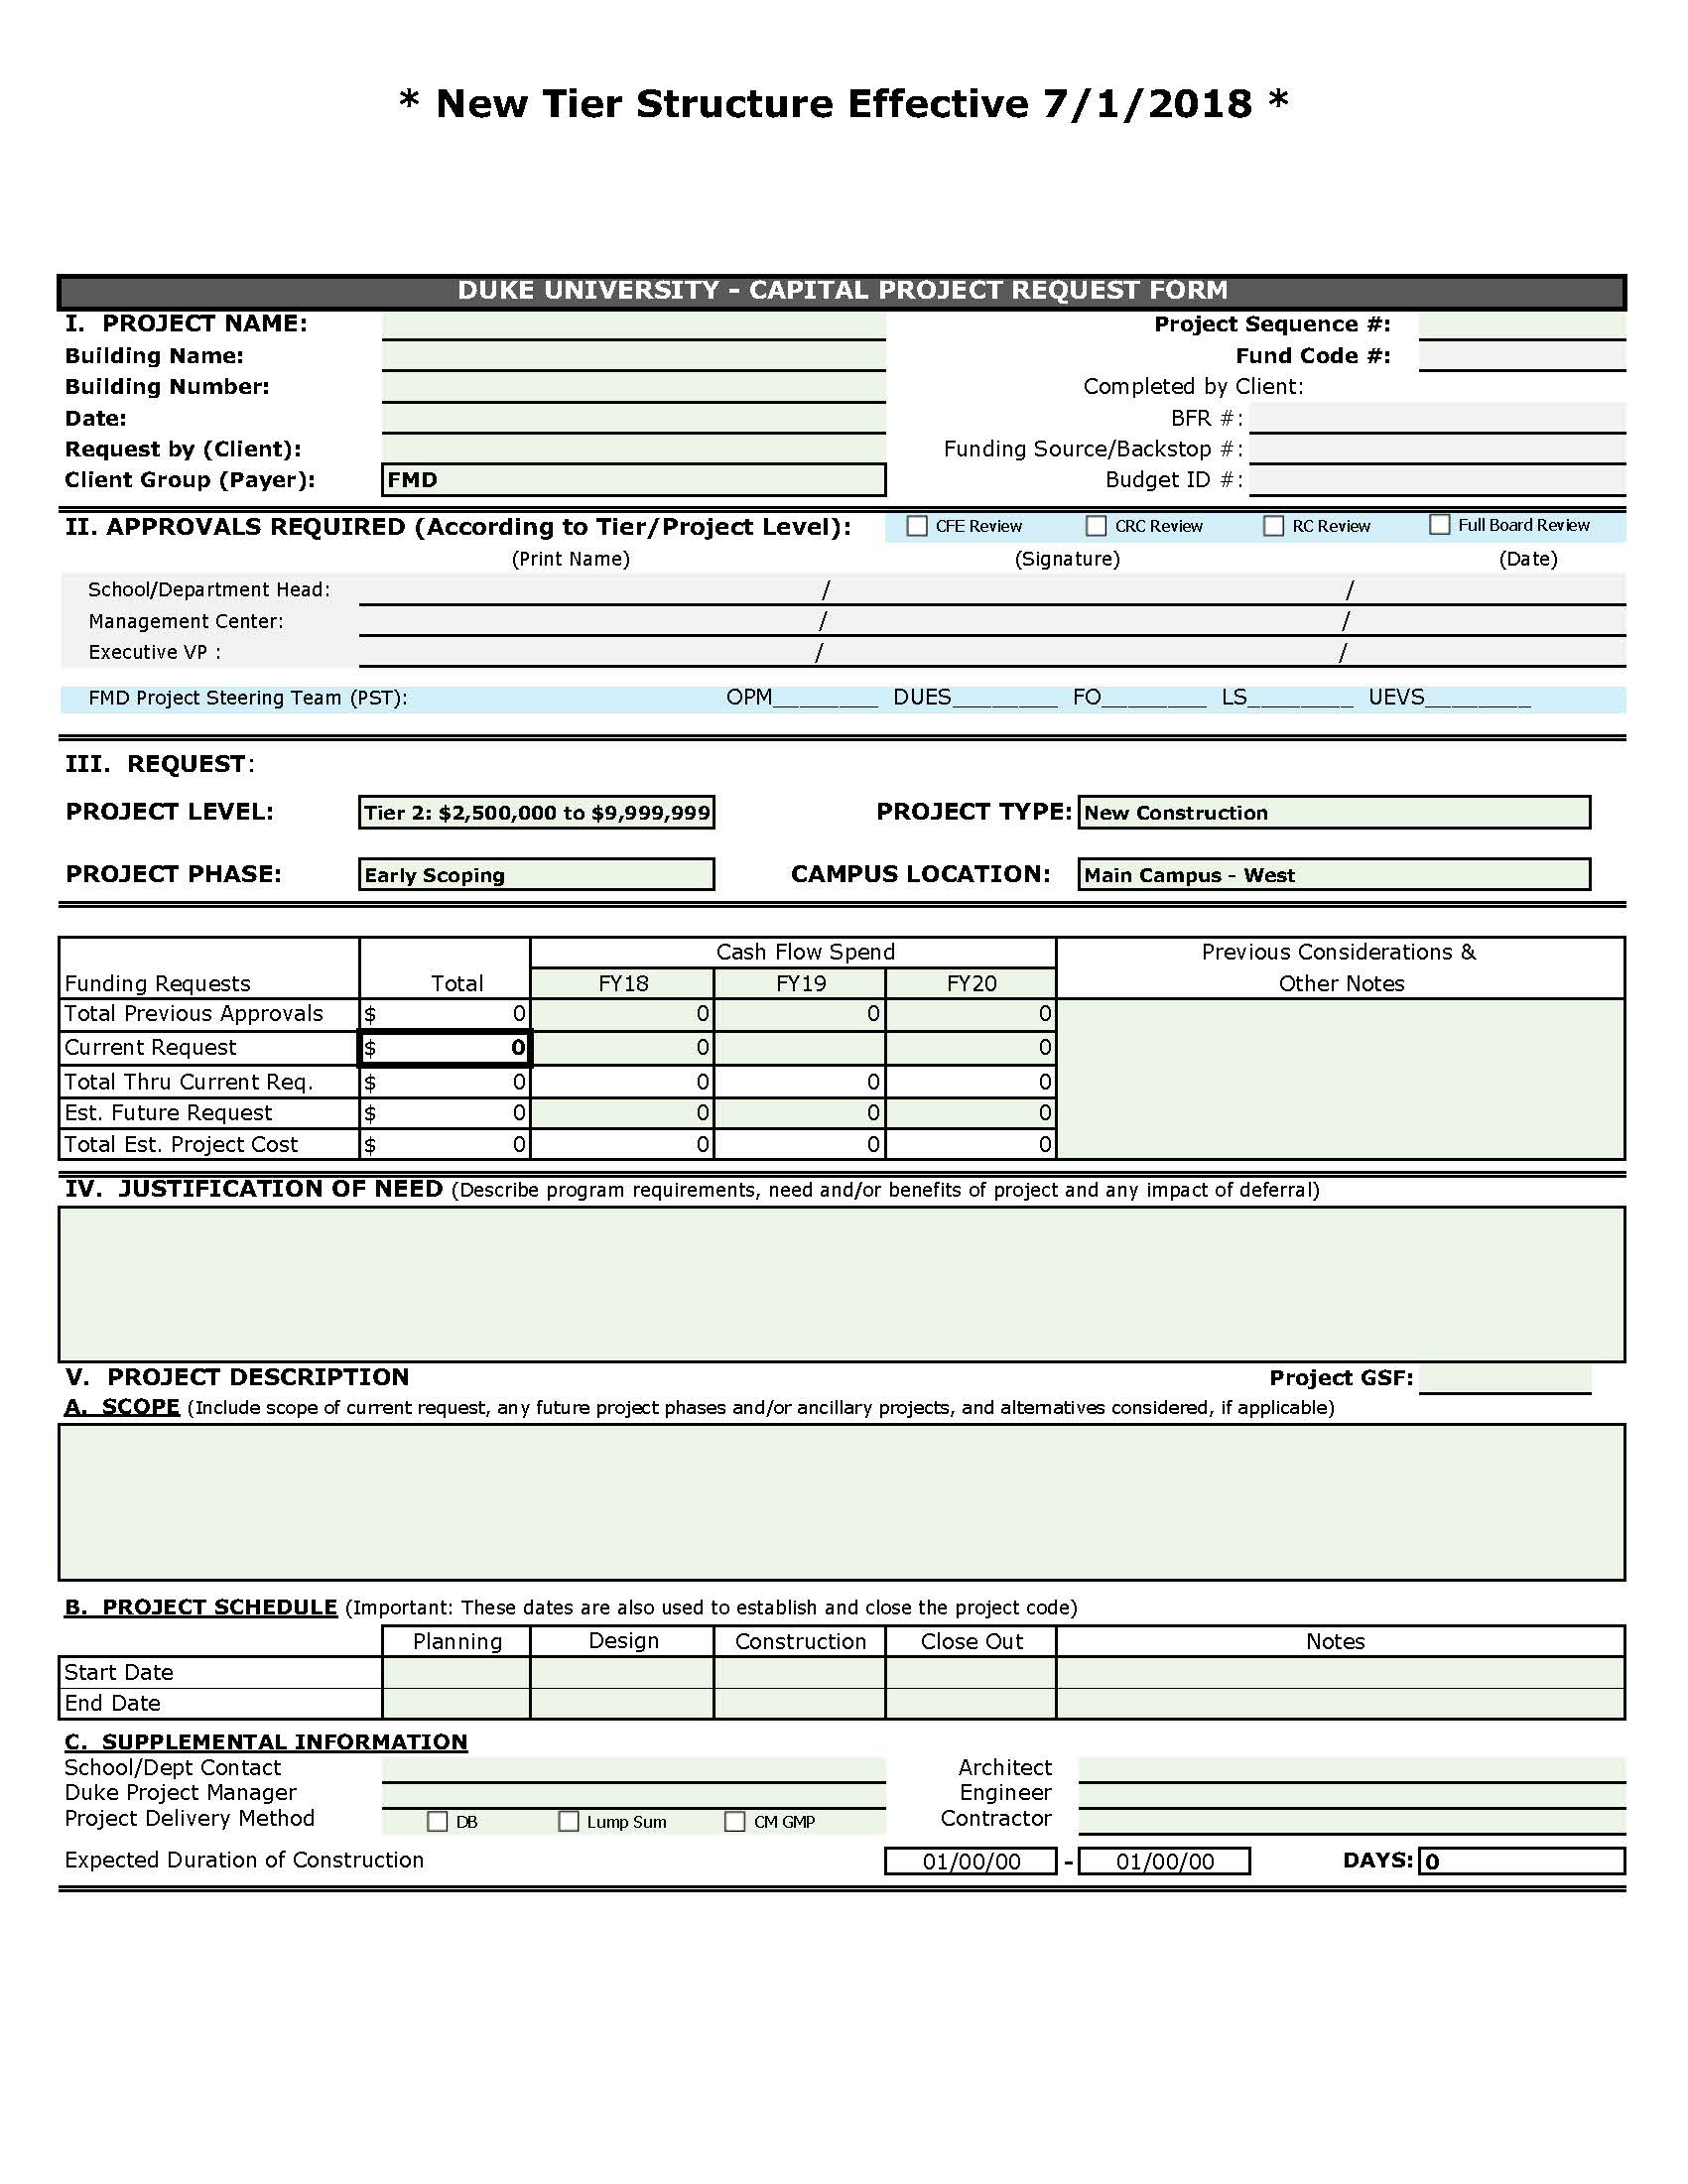 Capital Project Request Form